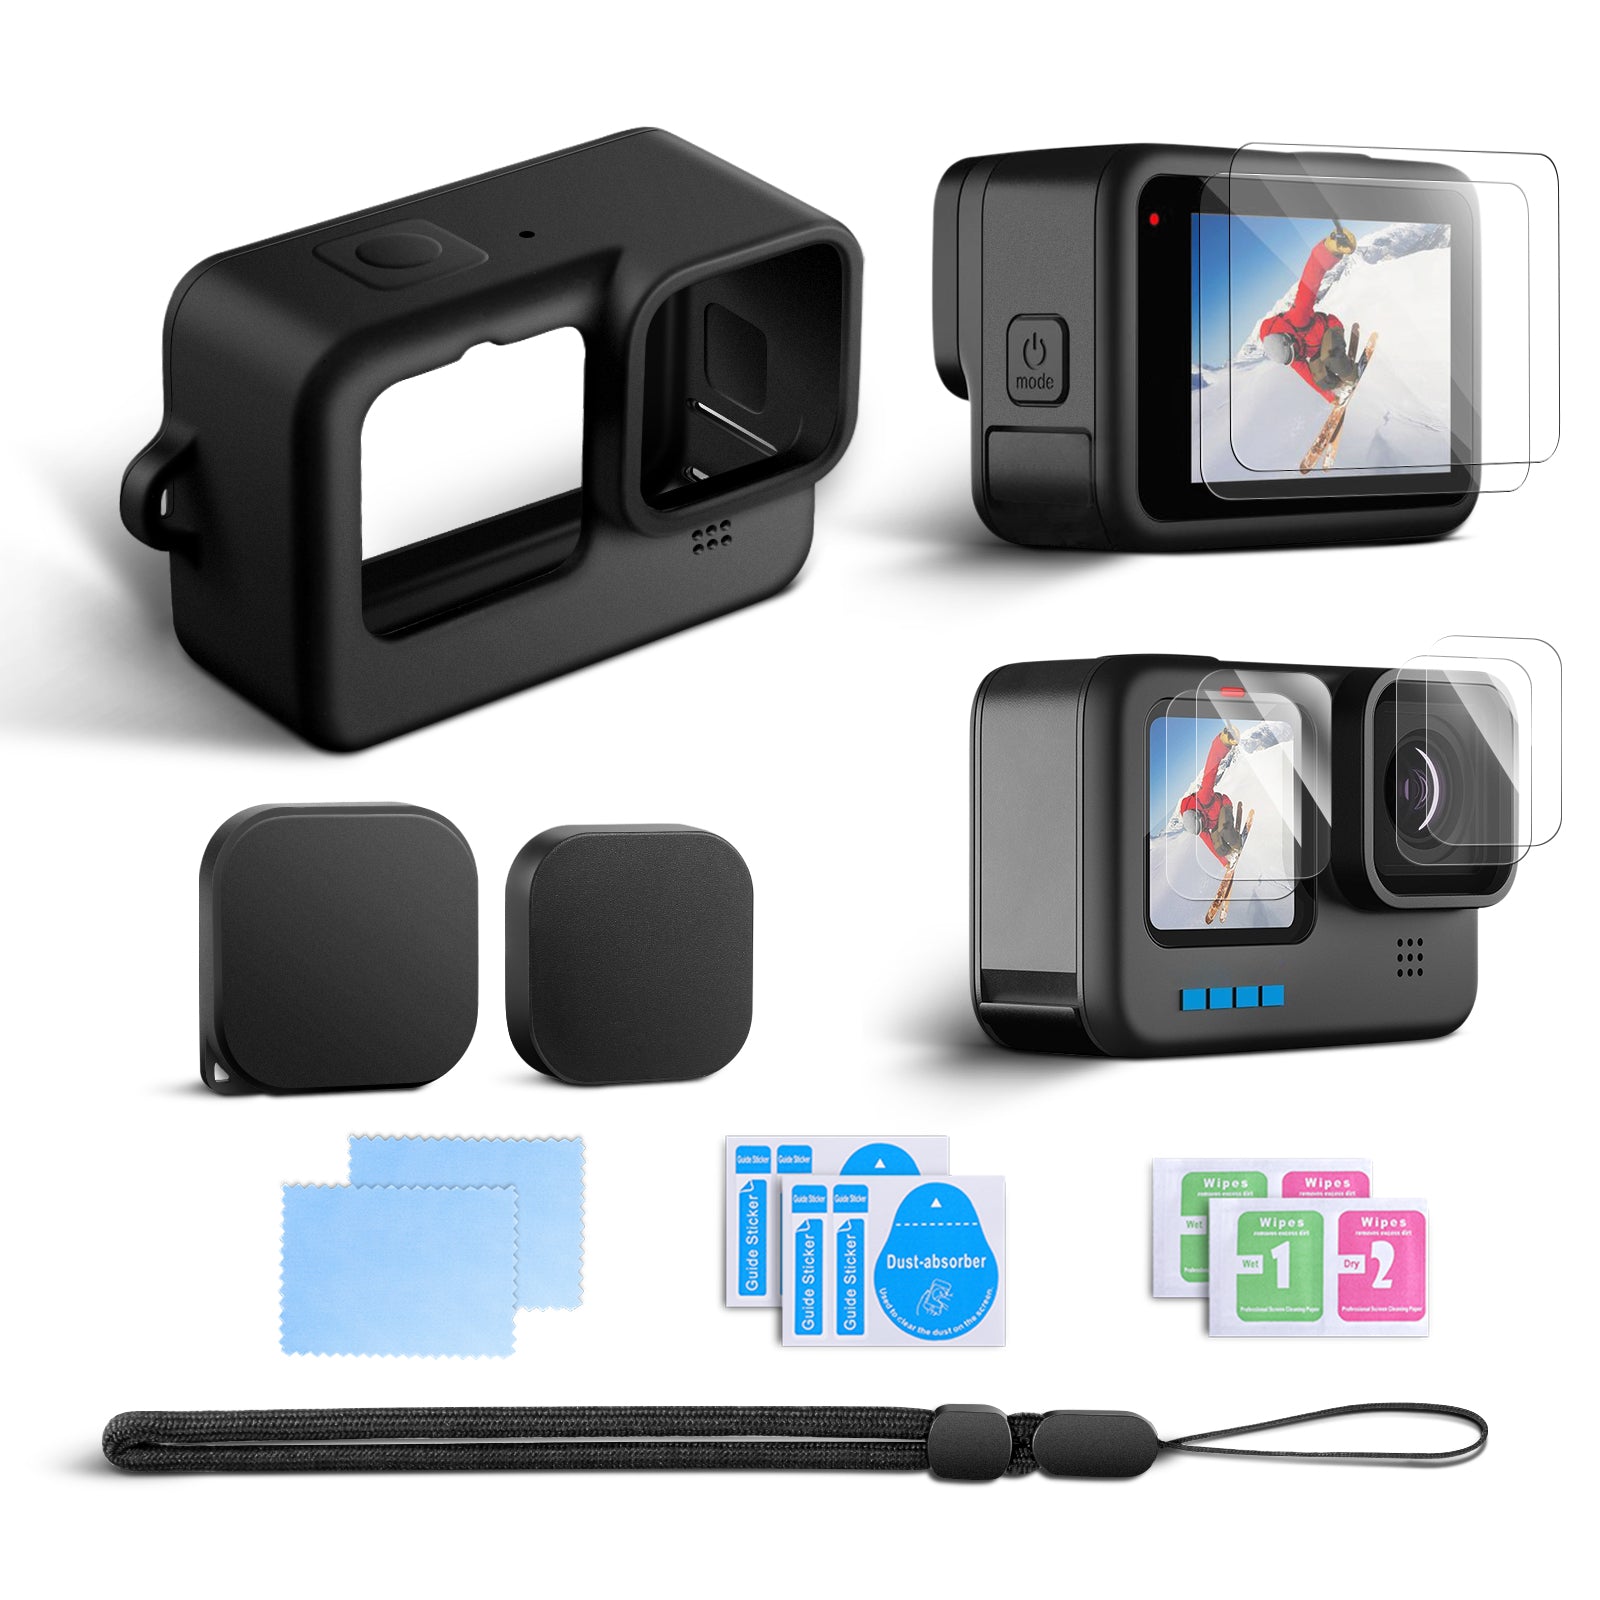 Which Accessories Will Work with GoPro HERO10 Black?